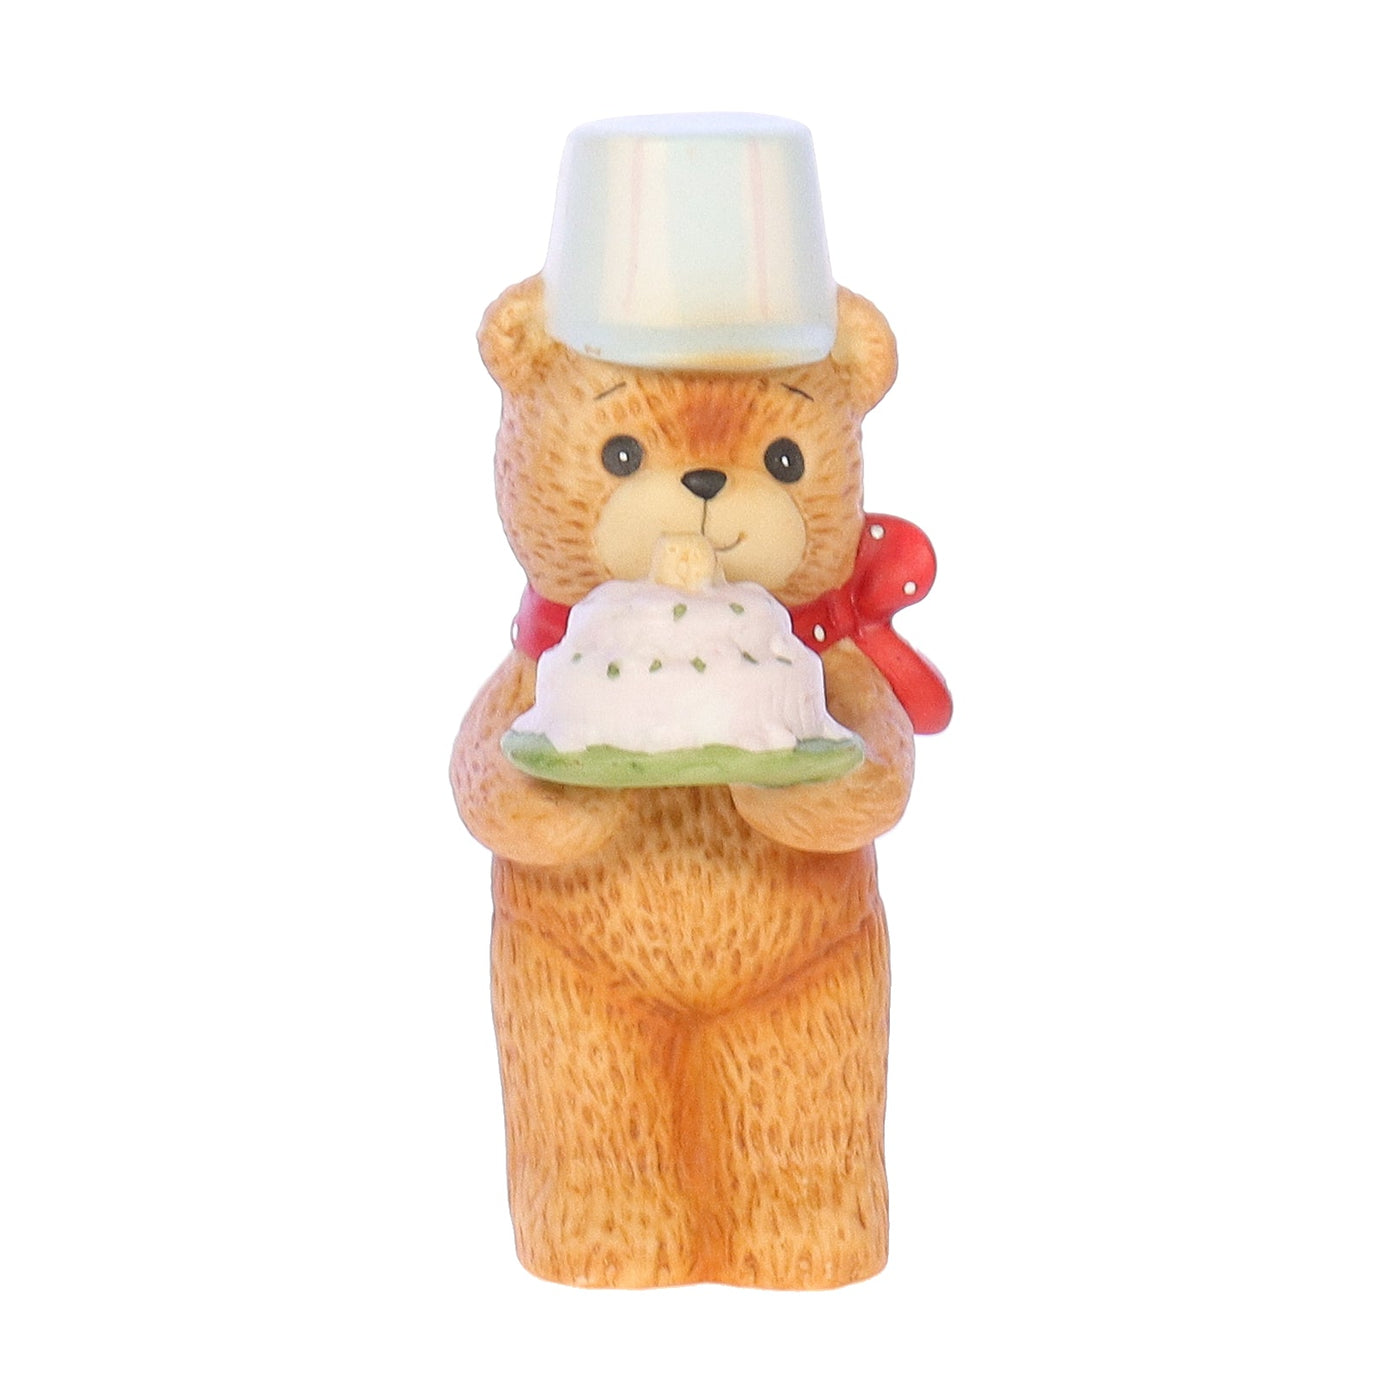 Lucy_and_Me_Baker_Bear_with_Birthday_Cake_Birthday_Figurine_1982